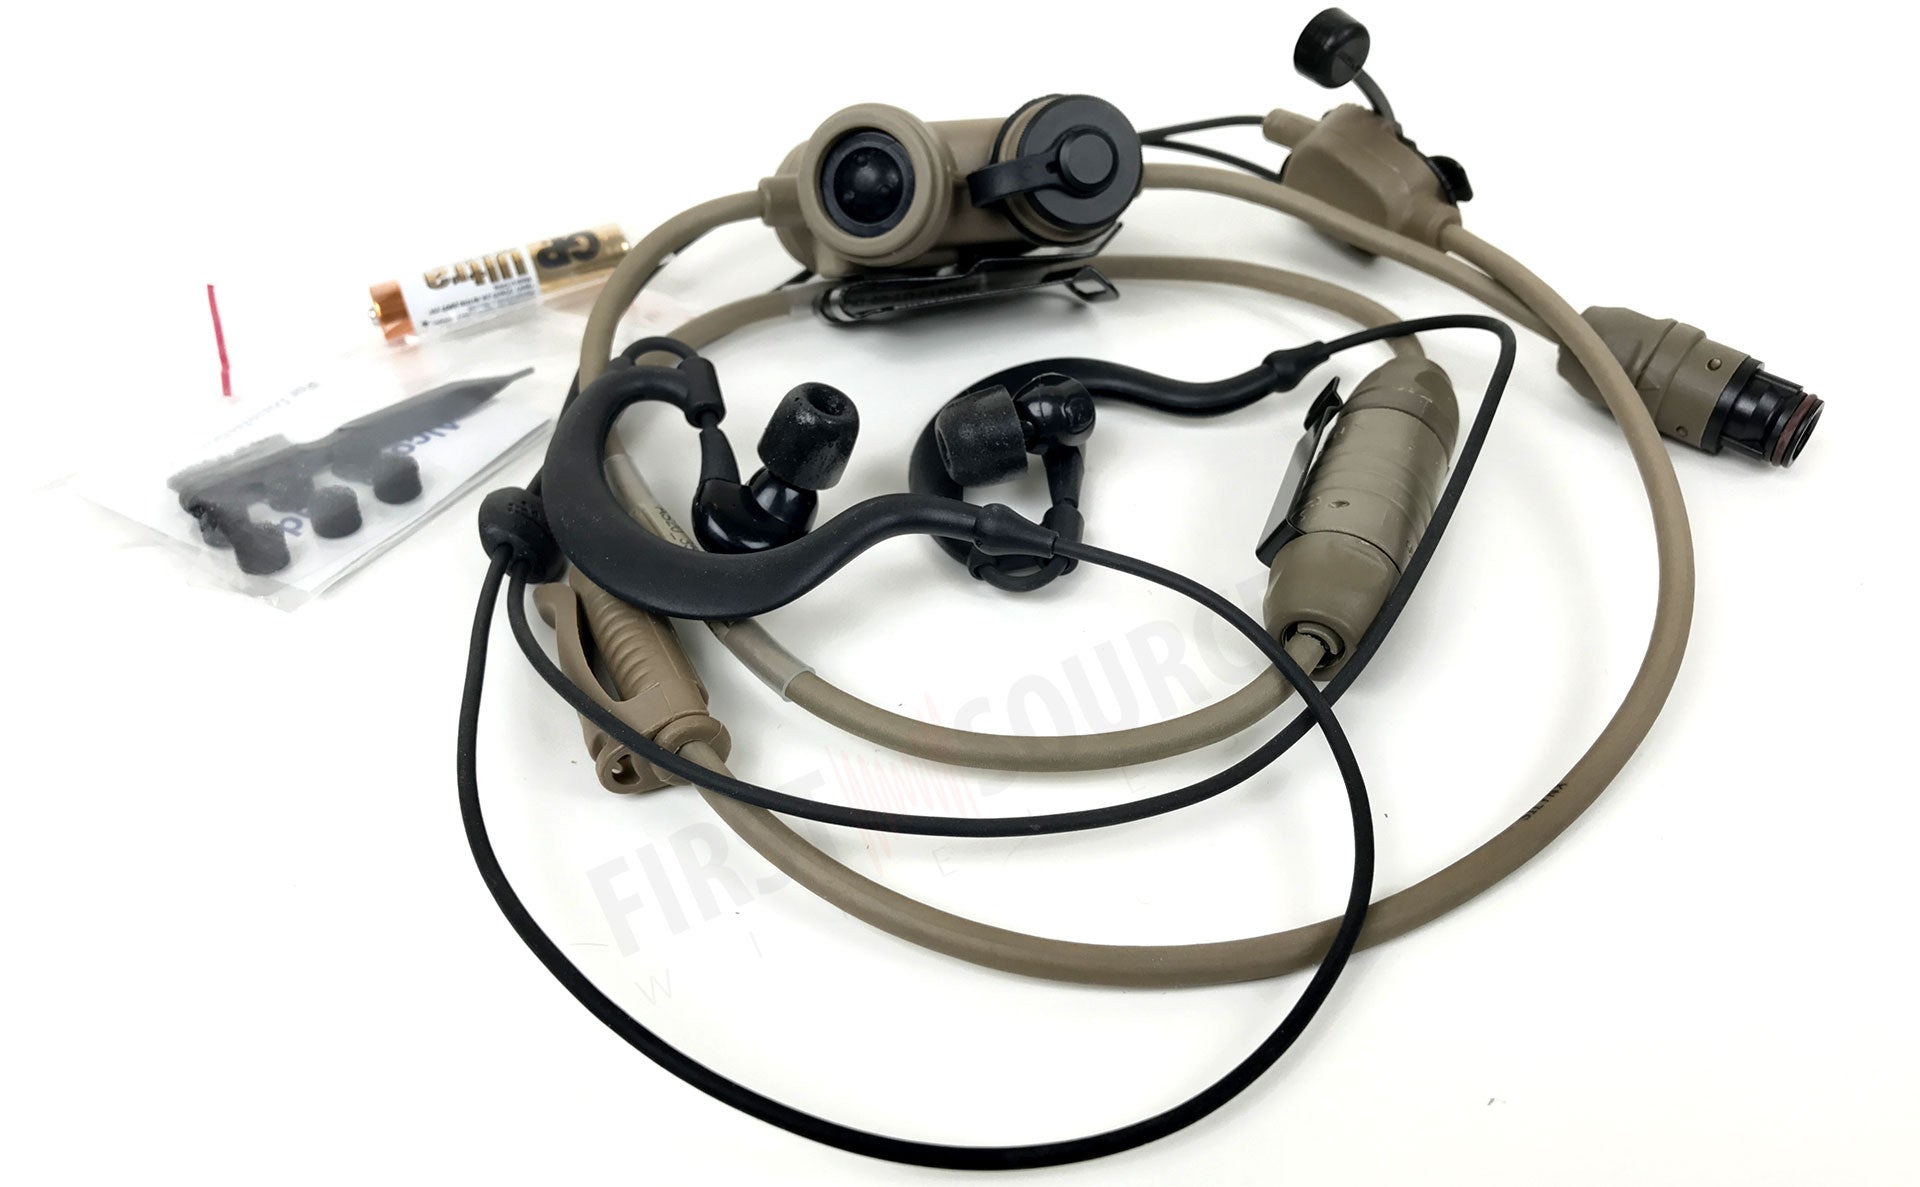 In-Ear Tactical Communications Clarus Pro Headset, Dual Comm, For use with 2 MBITR/PRC 152/117 Military Issued Radios